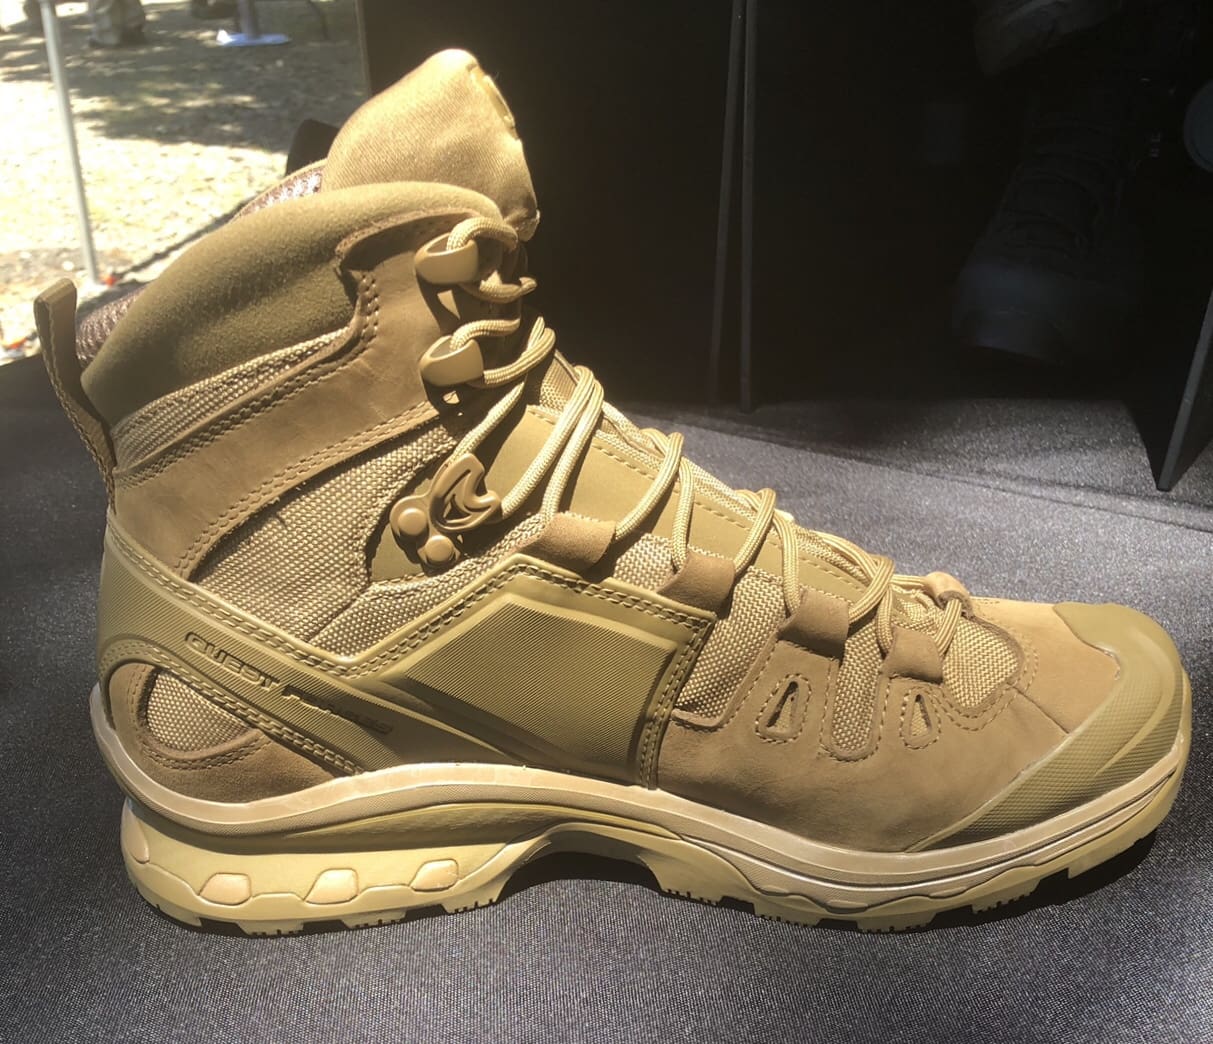 Salomon Forces - Compliant Quest Boots Now Available - Soldier Systems Daily